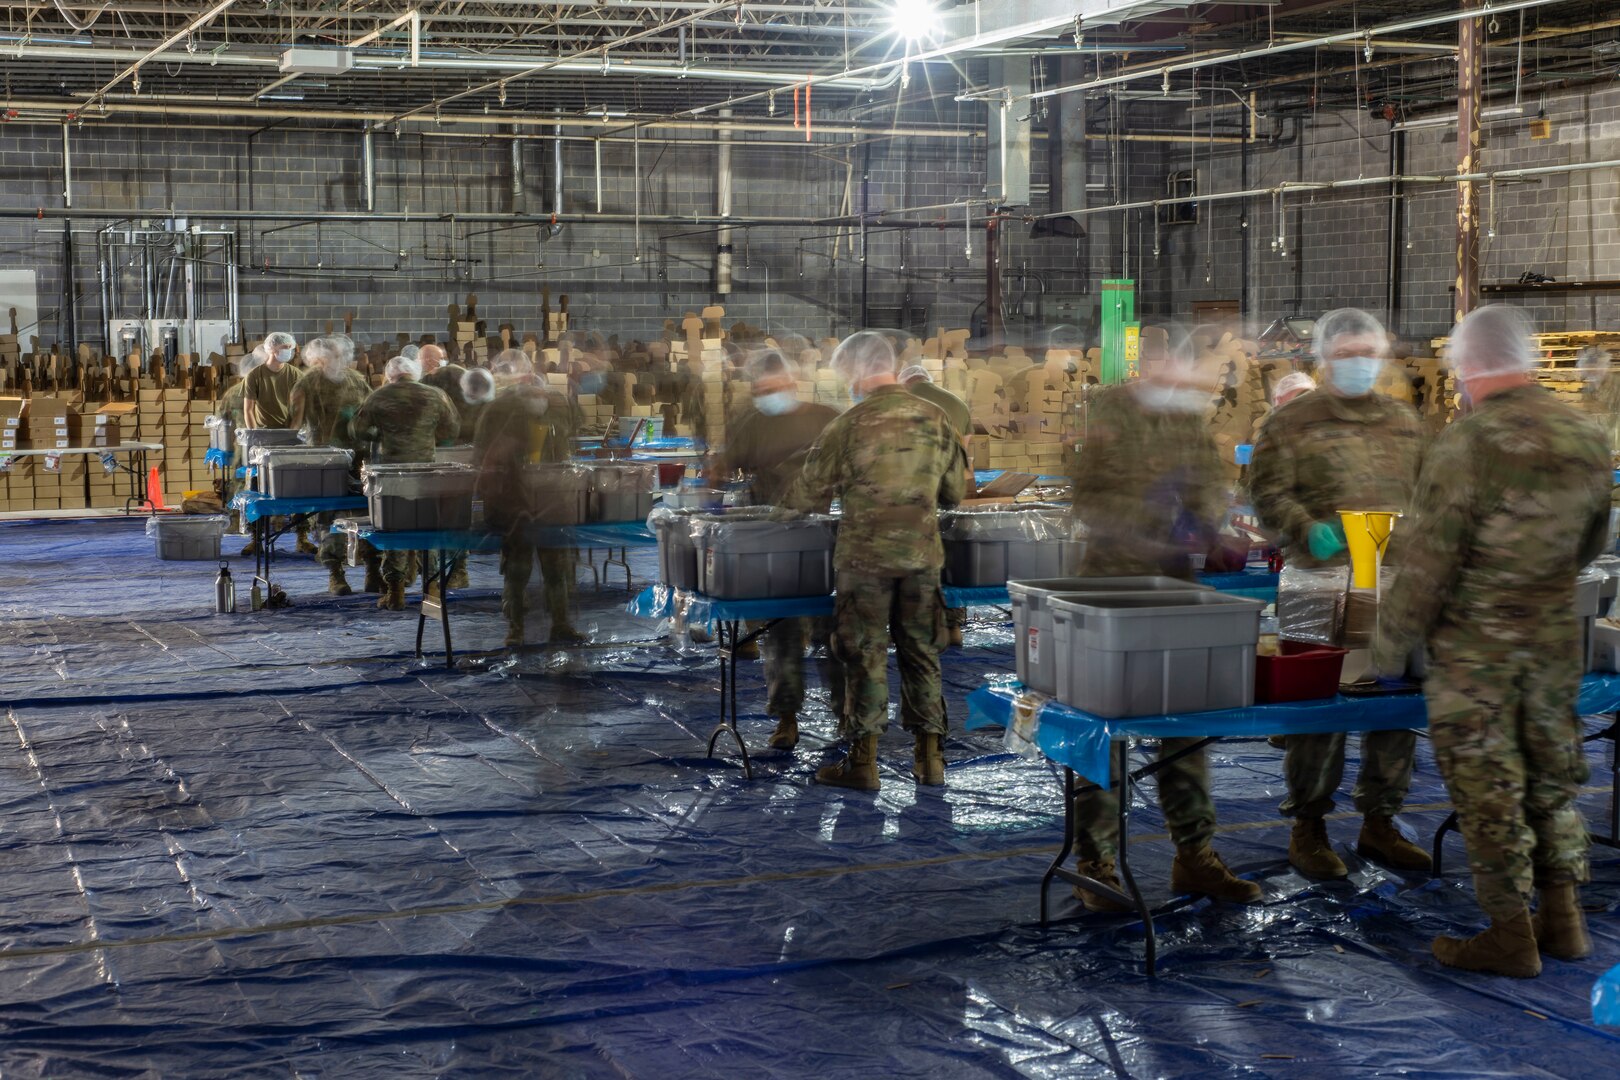 Soldiers of Company A, 2nd Combined Arms Battalion, 137th Infantry Regiment, measure out food in a boxed-meal assembly line operation in Leawood, Kansas, May 1, 2020. Kansas National Guard Soldiers, through The Outreach Program, packaged more than 2 million meals to be distributed to food banks across Kansas.